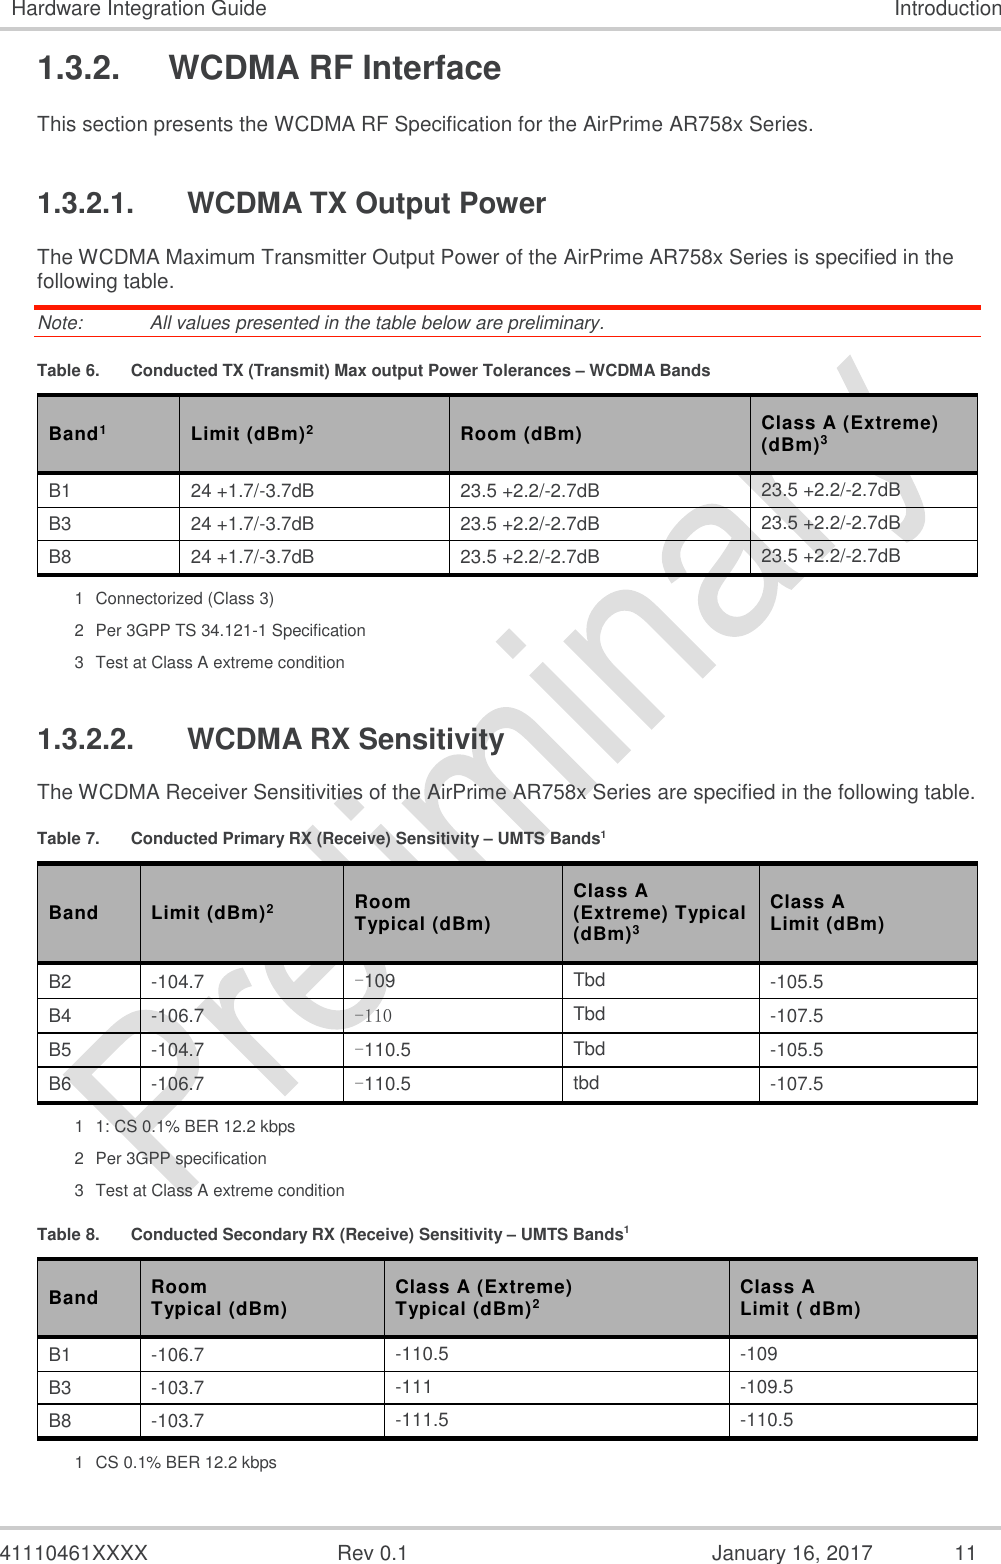  41110461XXXX  Rev 0.1  January 16, 2017  11 Hardware Integration Guide Introduction 1.3.2.  WCDMA RF Interface This section presents the WCDMA RF Specification for the AirPrime AR758x Series. 1.3.2.1.  WCDMA TX Output Power The WCDMA Maximum Transmitter Output Power of the AirPrime AR758x Series is specified in the following table. Note:   All values presented in the table below are preliminary. Table 6.  Conducted TX (Transmit) Max output Power Tolerances – WCDMA Bands Band1 Limit (dBm)2 Room (dBm) Class A (Extreme) (dBm)3 B1 24 +1.7/-3.7dB 23.5 +2.2/-2.7dB 23.5 +2.2/-2.7dB B3 24 +1.7/-3.7dB 23.5 +2.2/-2.7dB 23.5 +2.2/-2.7dB B8 24 +1.7/-3.7dB 23.5 +2.2/-2.7dB 23.5 +2.2/-2.7dB 1  Connectorized (Class 3) 2  Per 3GPP TS 34.121-1 Specification 3  Test at Class A extreme condition 1.3.2.2.  WCDMA RX Sensitivity The WCDMA Receiver Sensitivities of the AirPrime AR758x Series are specified in the following table. Table 7.  Conducted Primary RX (Receive) Sensitivity – UMTS Bands1 Band Limit (dBm)2 Room Typical (dBm) Class A (Extreme) Typical (dBm)3 Class A Limit (dBm) B2 -104.7 -109 Tbd -105.5 B4 -106.7 -110 Tbd -107.5 B5 -104.7 -110.5 Tbd -105.5 B6 -106.7 -110.5 tbd -107.5 1  1: CS 0.1% BER 12.2 kbps 2  Per 3GPP specification 3  Test at Class A extreme condition Table 8.  Conducted Secondary RX (Receive) Sensitivity – UMTS Bands1 Band Room Typical (dBm) Class A (Extreme) Typical (dBm)2 Class A Limit ( dBm) B1 -106.7 -110.5 -109 B3 -103.7 -111 -109.5 B8 -103.7 -111.5 -110.5 1  CS 0.1% BER 12.2 kbps 